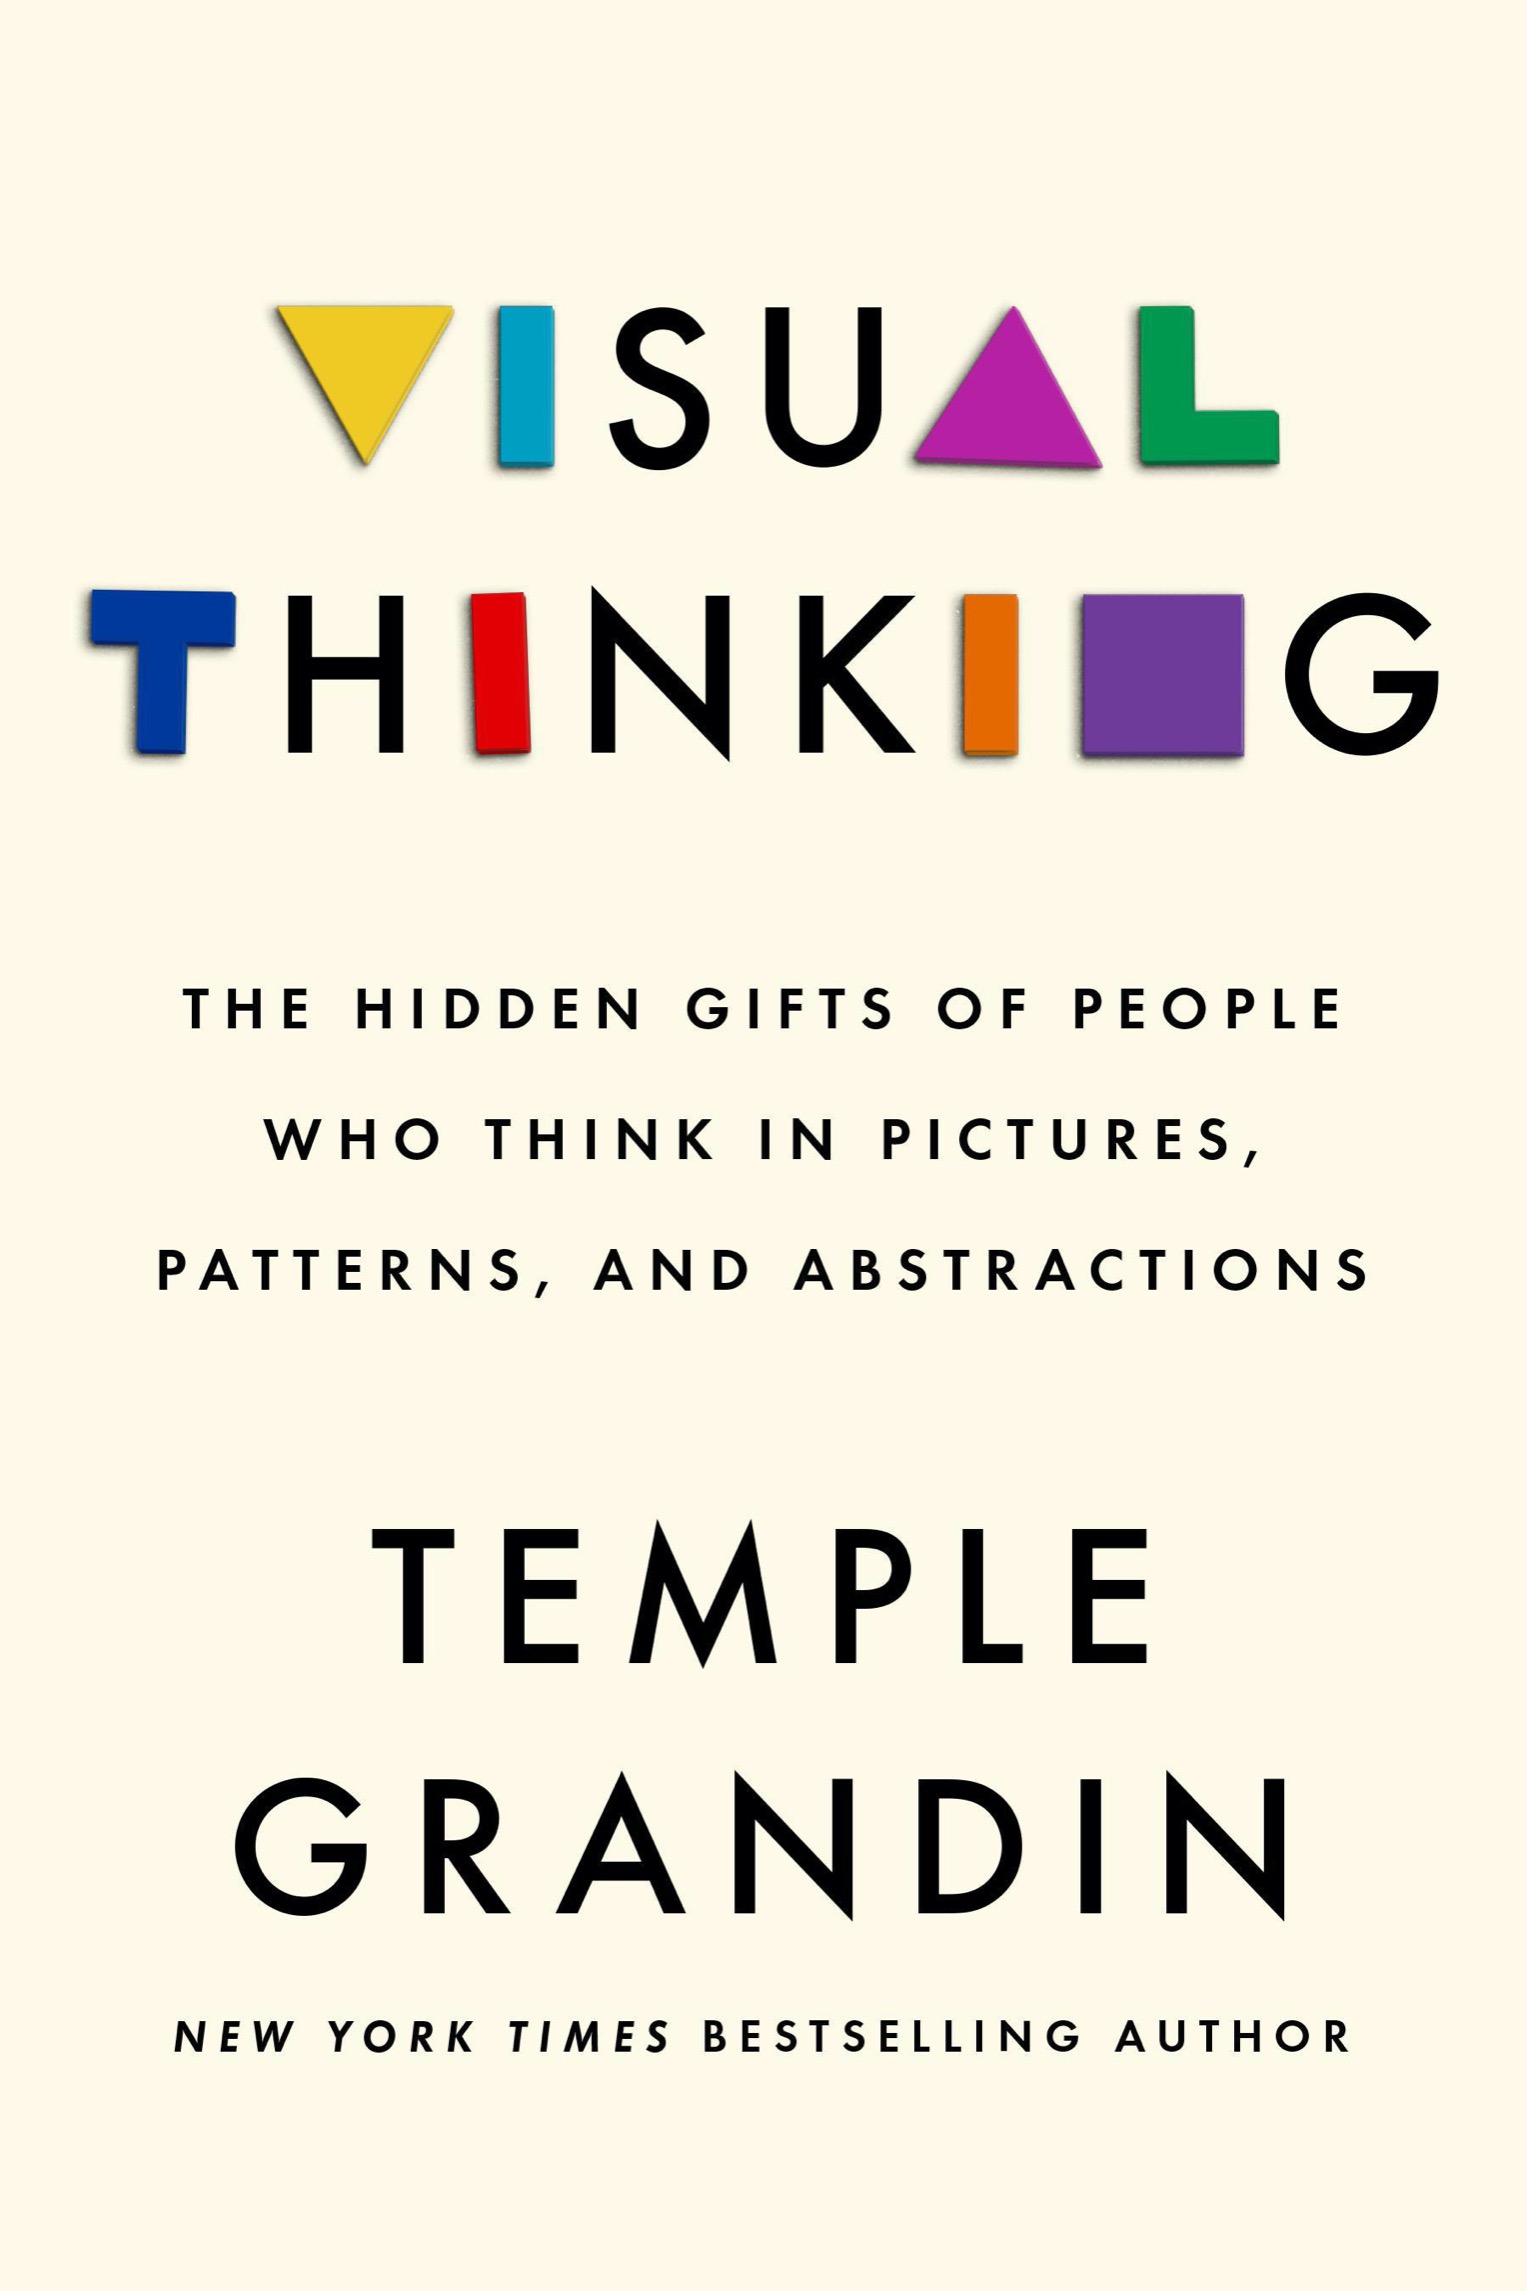 Visual Thinking, The Hidden Gifts of People Who Think in Pictures, Patterns, and Abstractions.